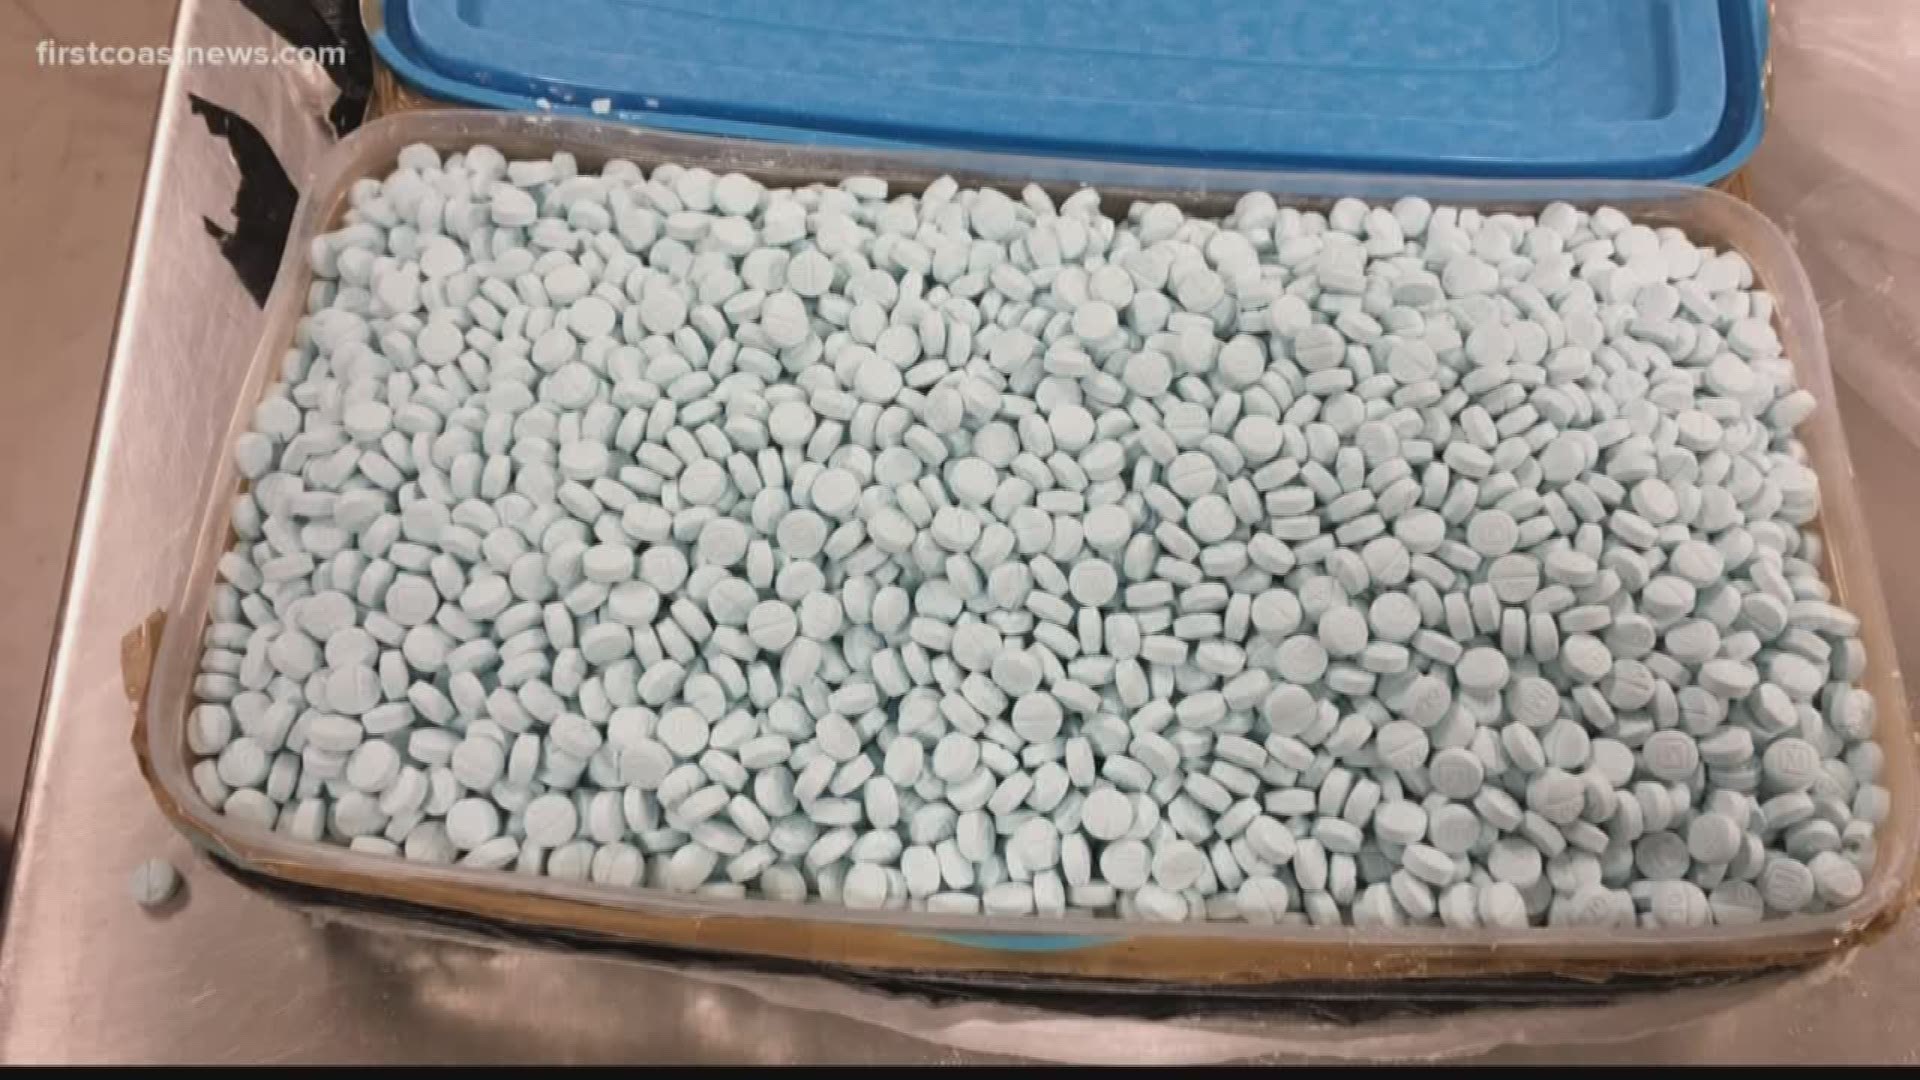 The DEA warning counterfeit prescription pills from Mexico are killing Americans.